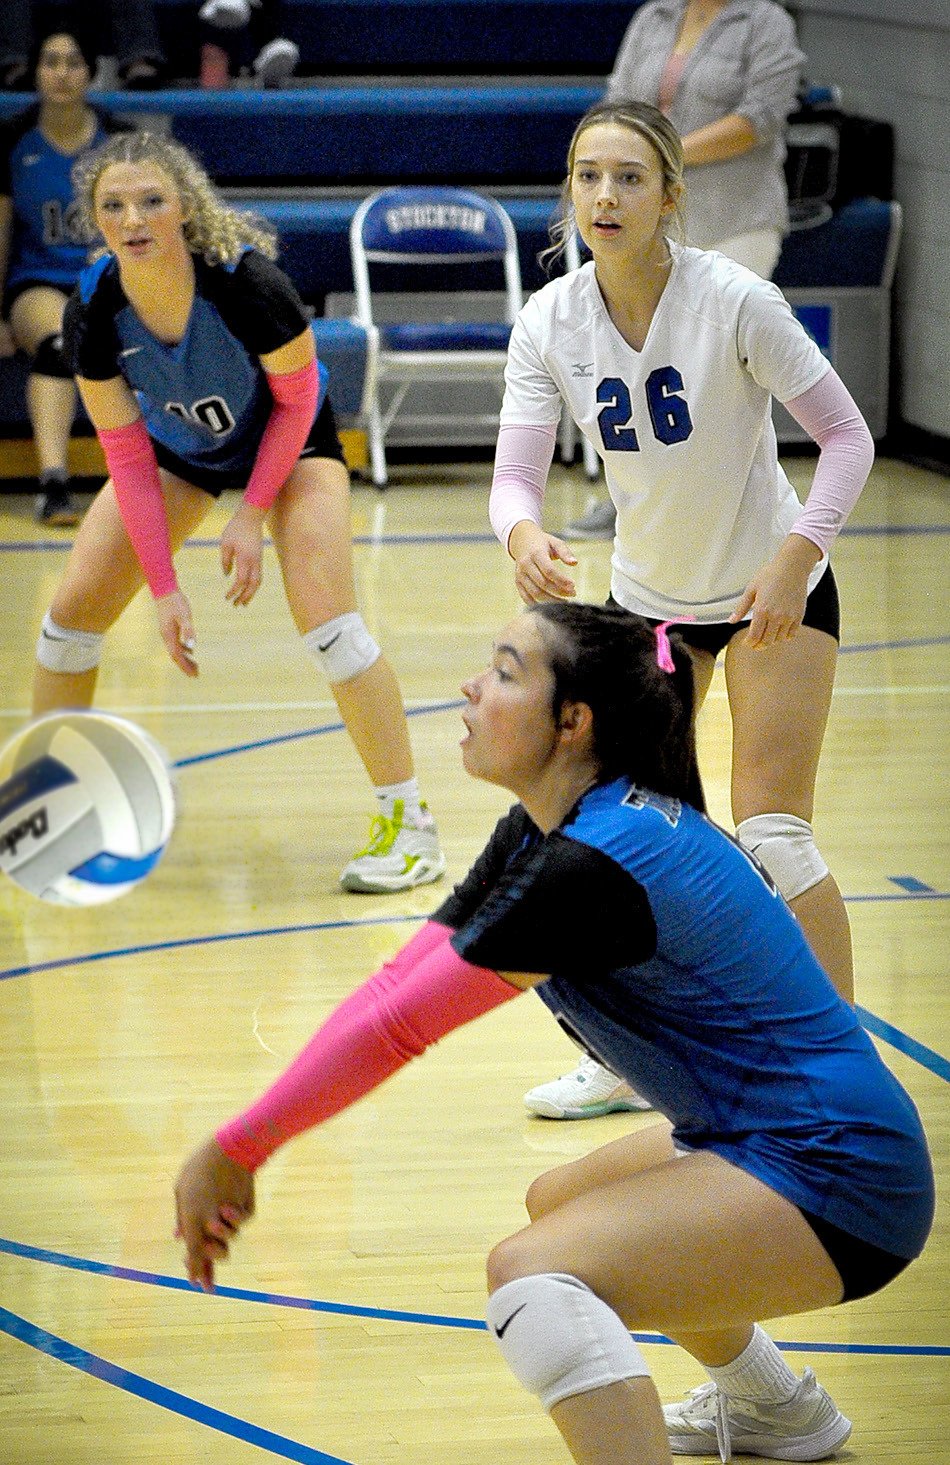 Bodye Stithem (with Ashlyn Hahn and Claire Plumer) vs. Decatur Community